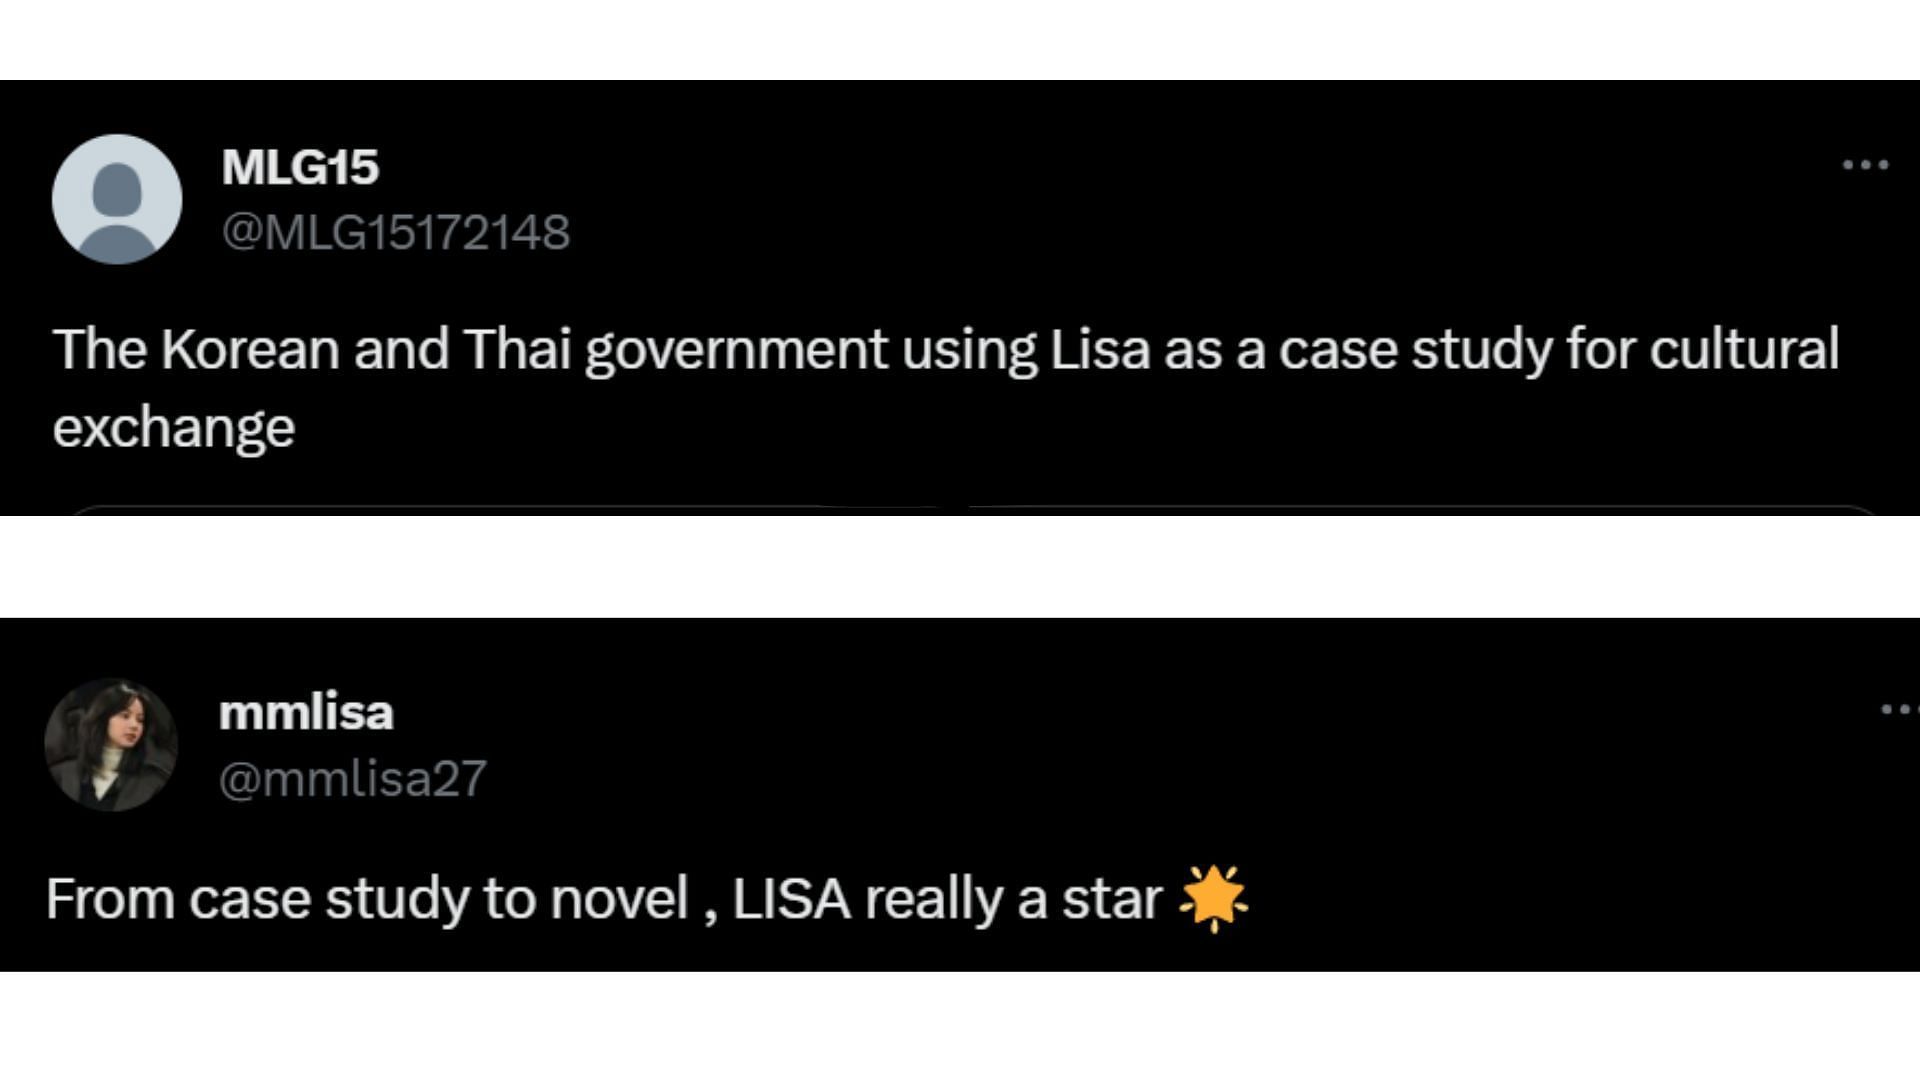 Fans react to Lisa&#039;s inclusion in an academic study section (Images via X/@MLG15172148 and @mmlisa27)